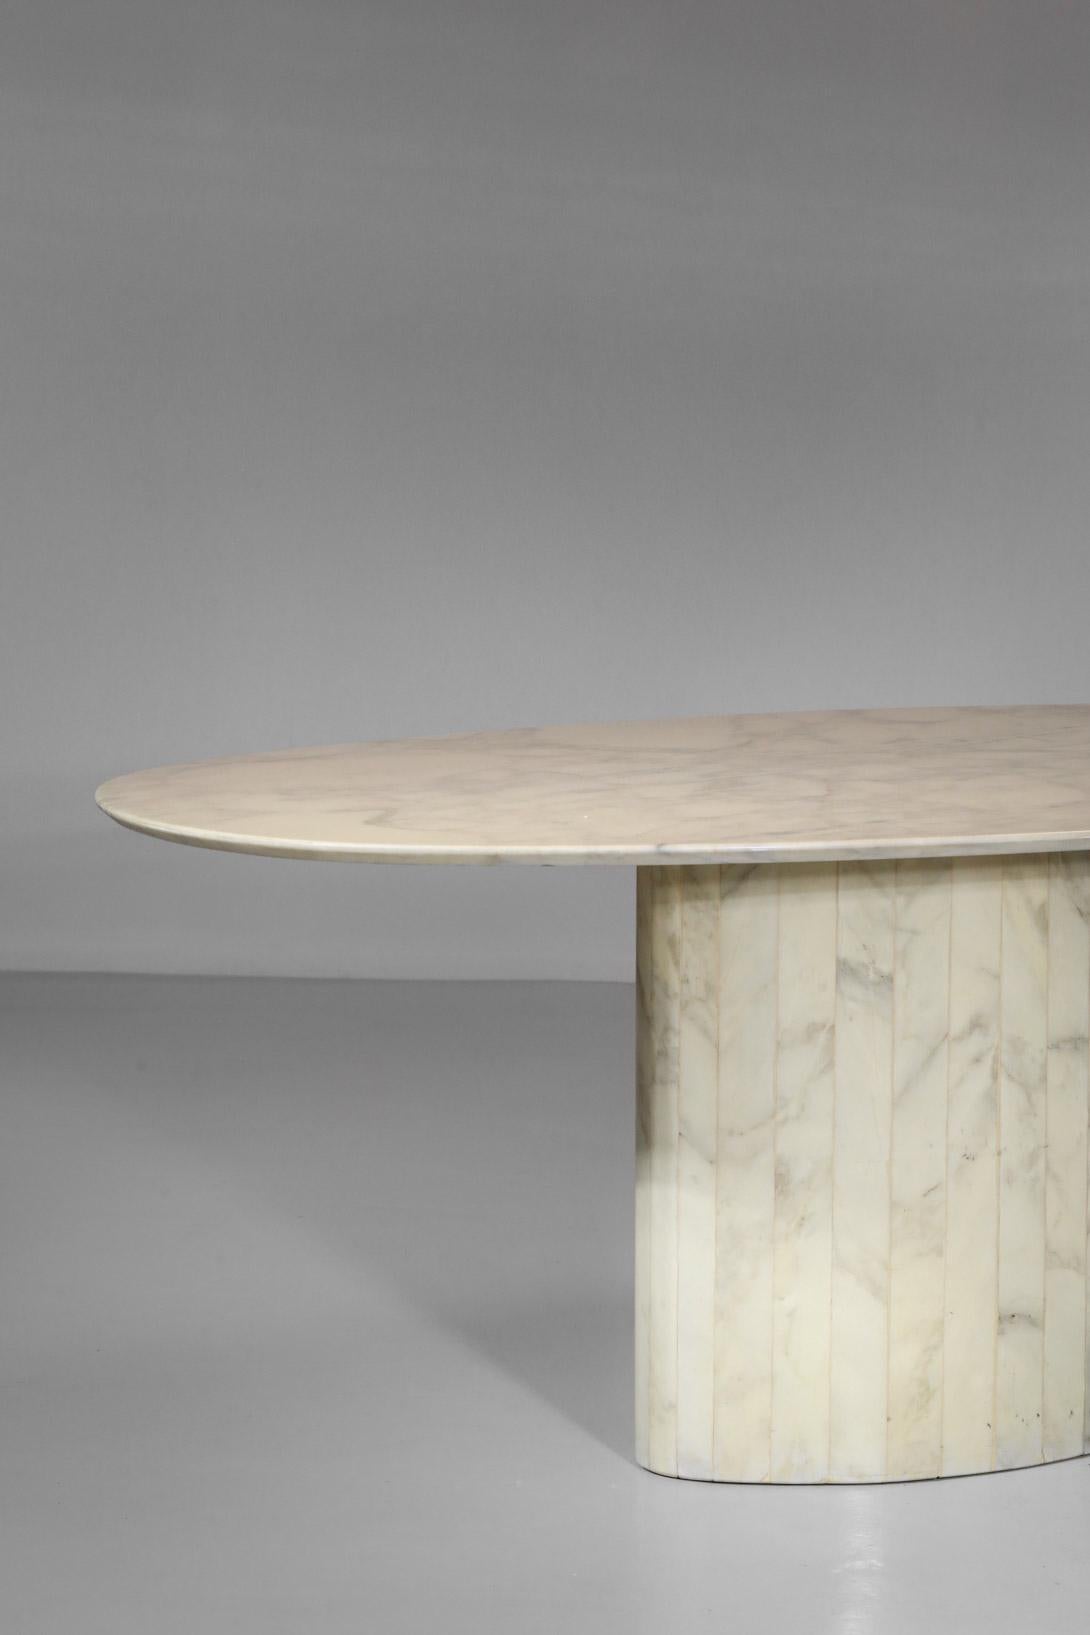 Late 20th Century Oval Dining Table in Carrara Marble from the 1970s French Design